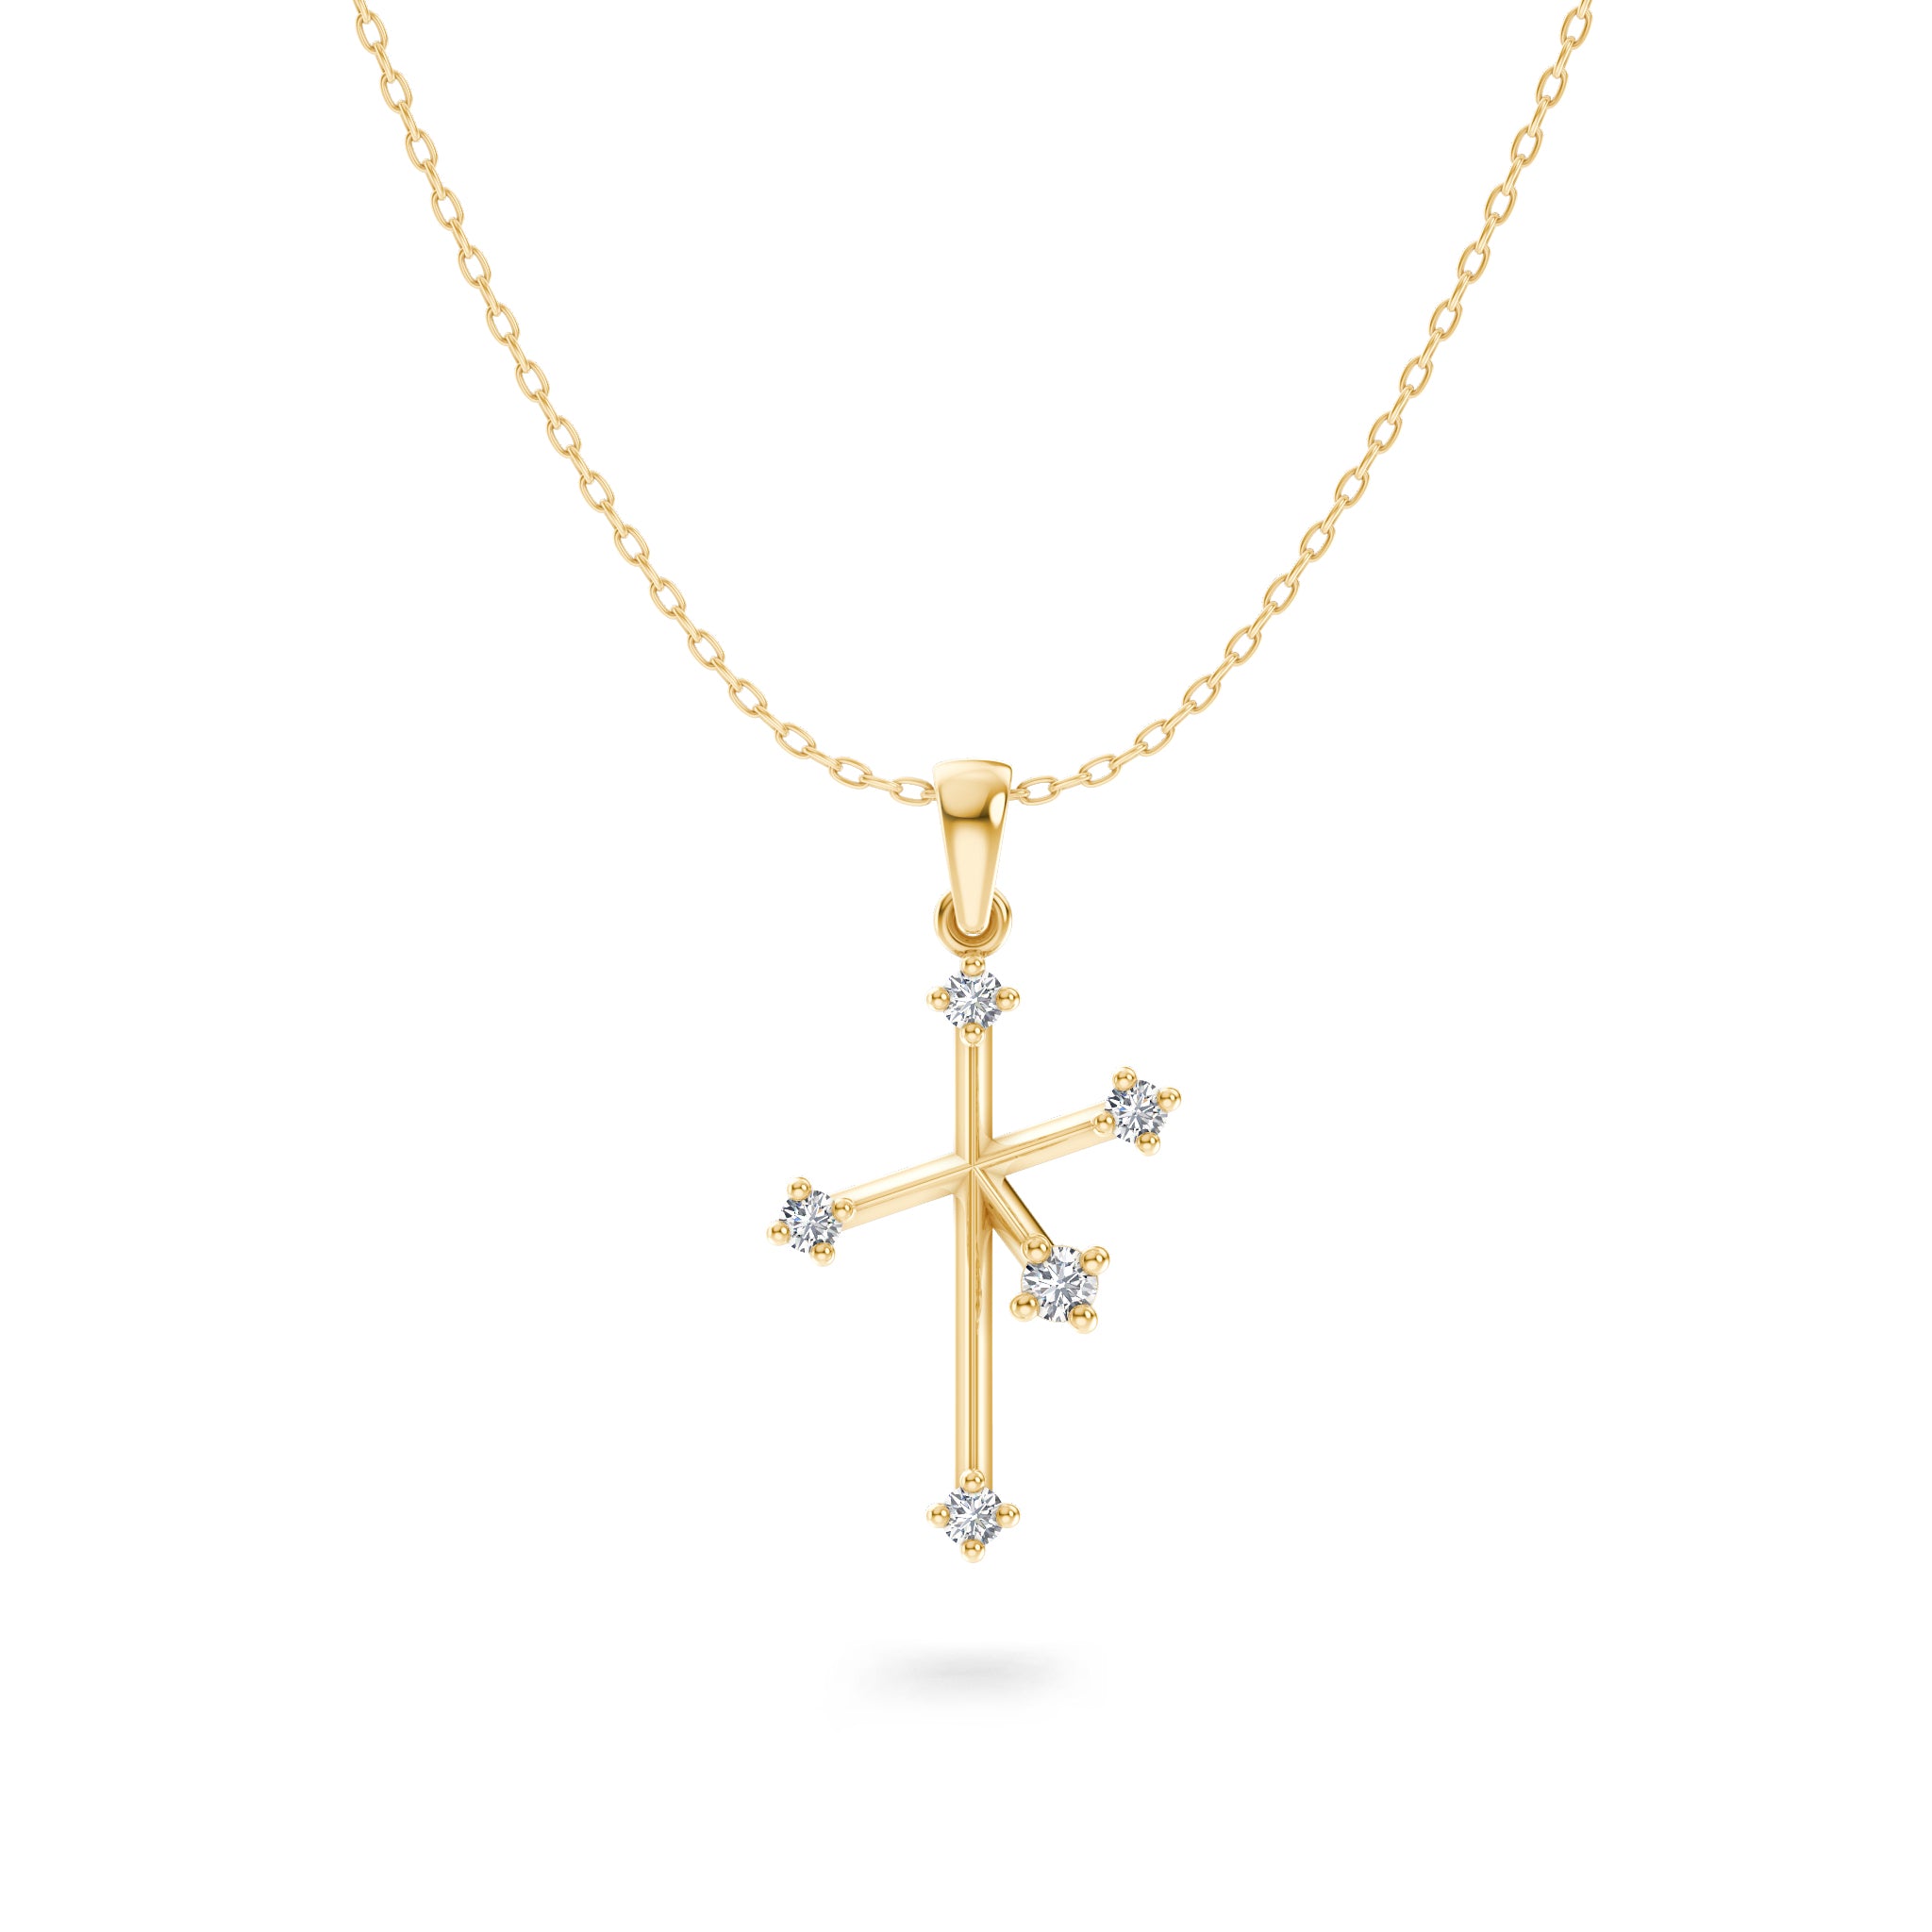 Shimansky - Southern Cross Small Diamond Pendant Crafted in 14K Yellow Gold